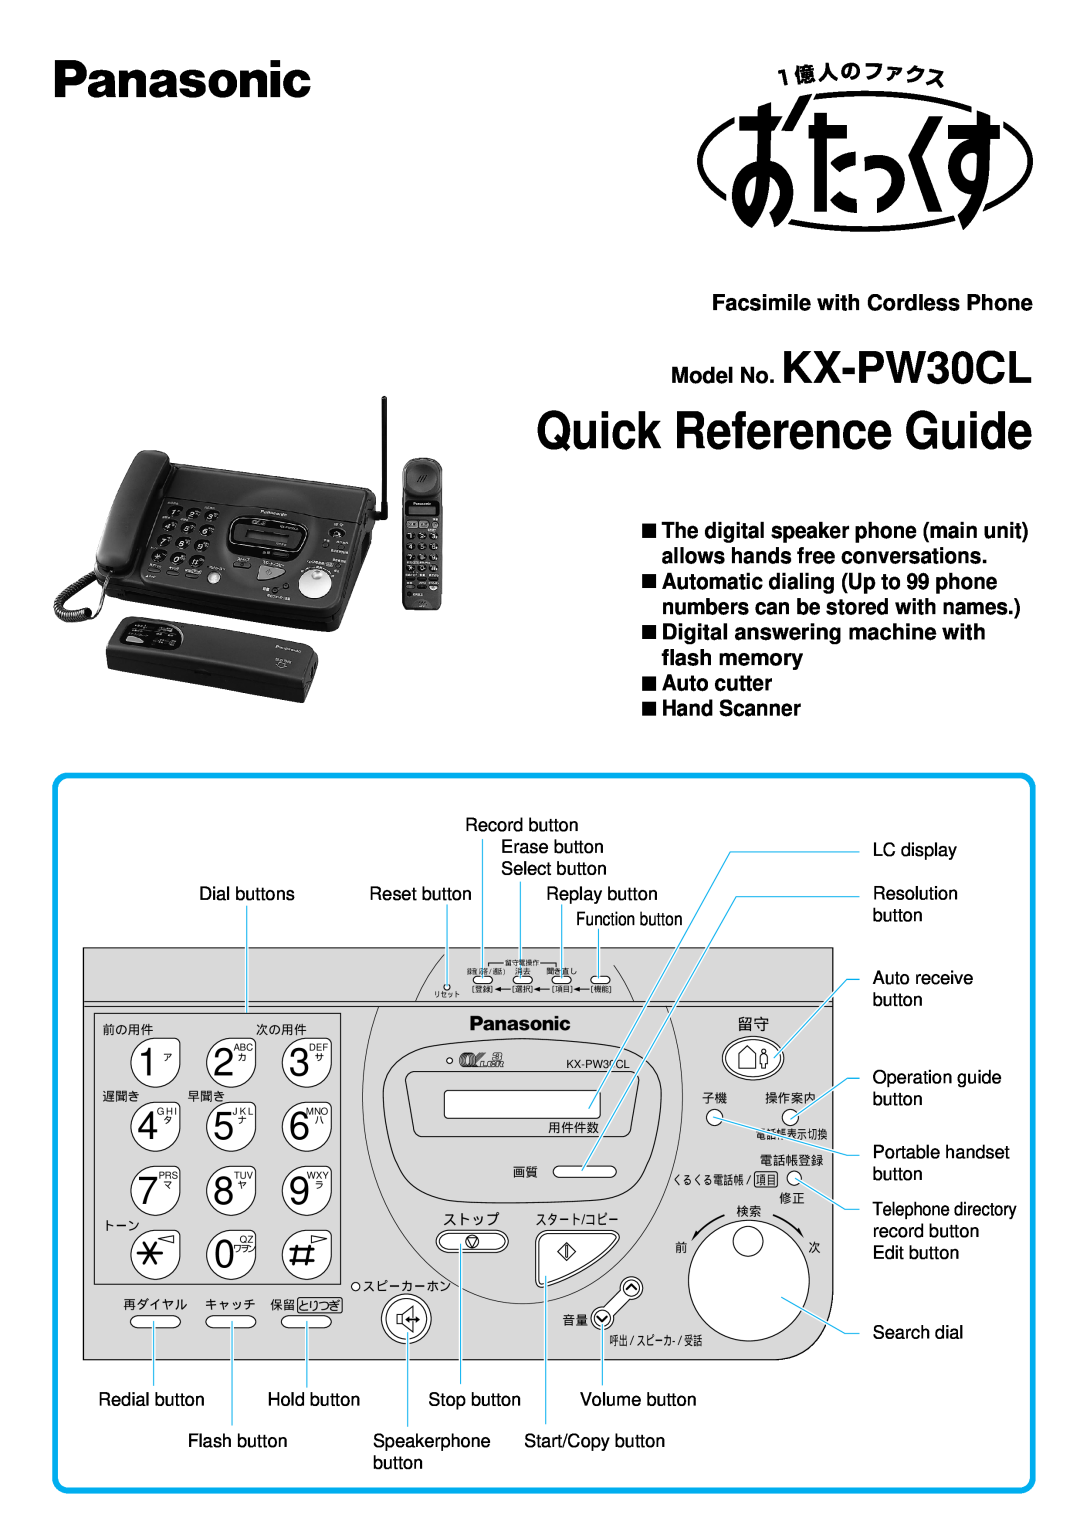 Panasonic manual Facsimile with Cordless Phone Model No. KX-PW30CL, Quick Reference Guide 